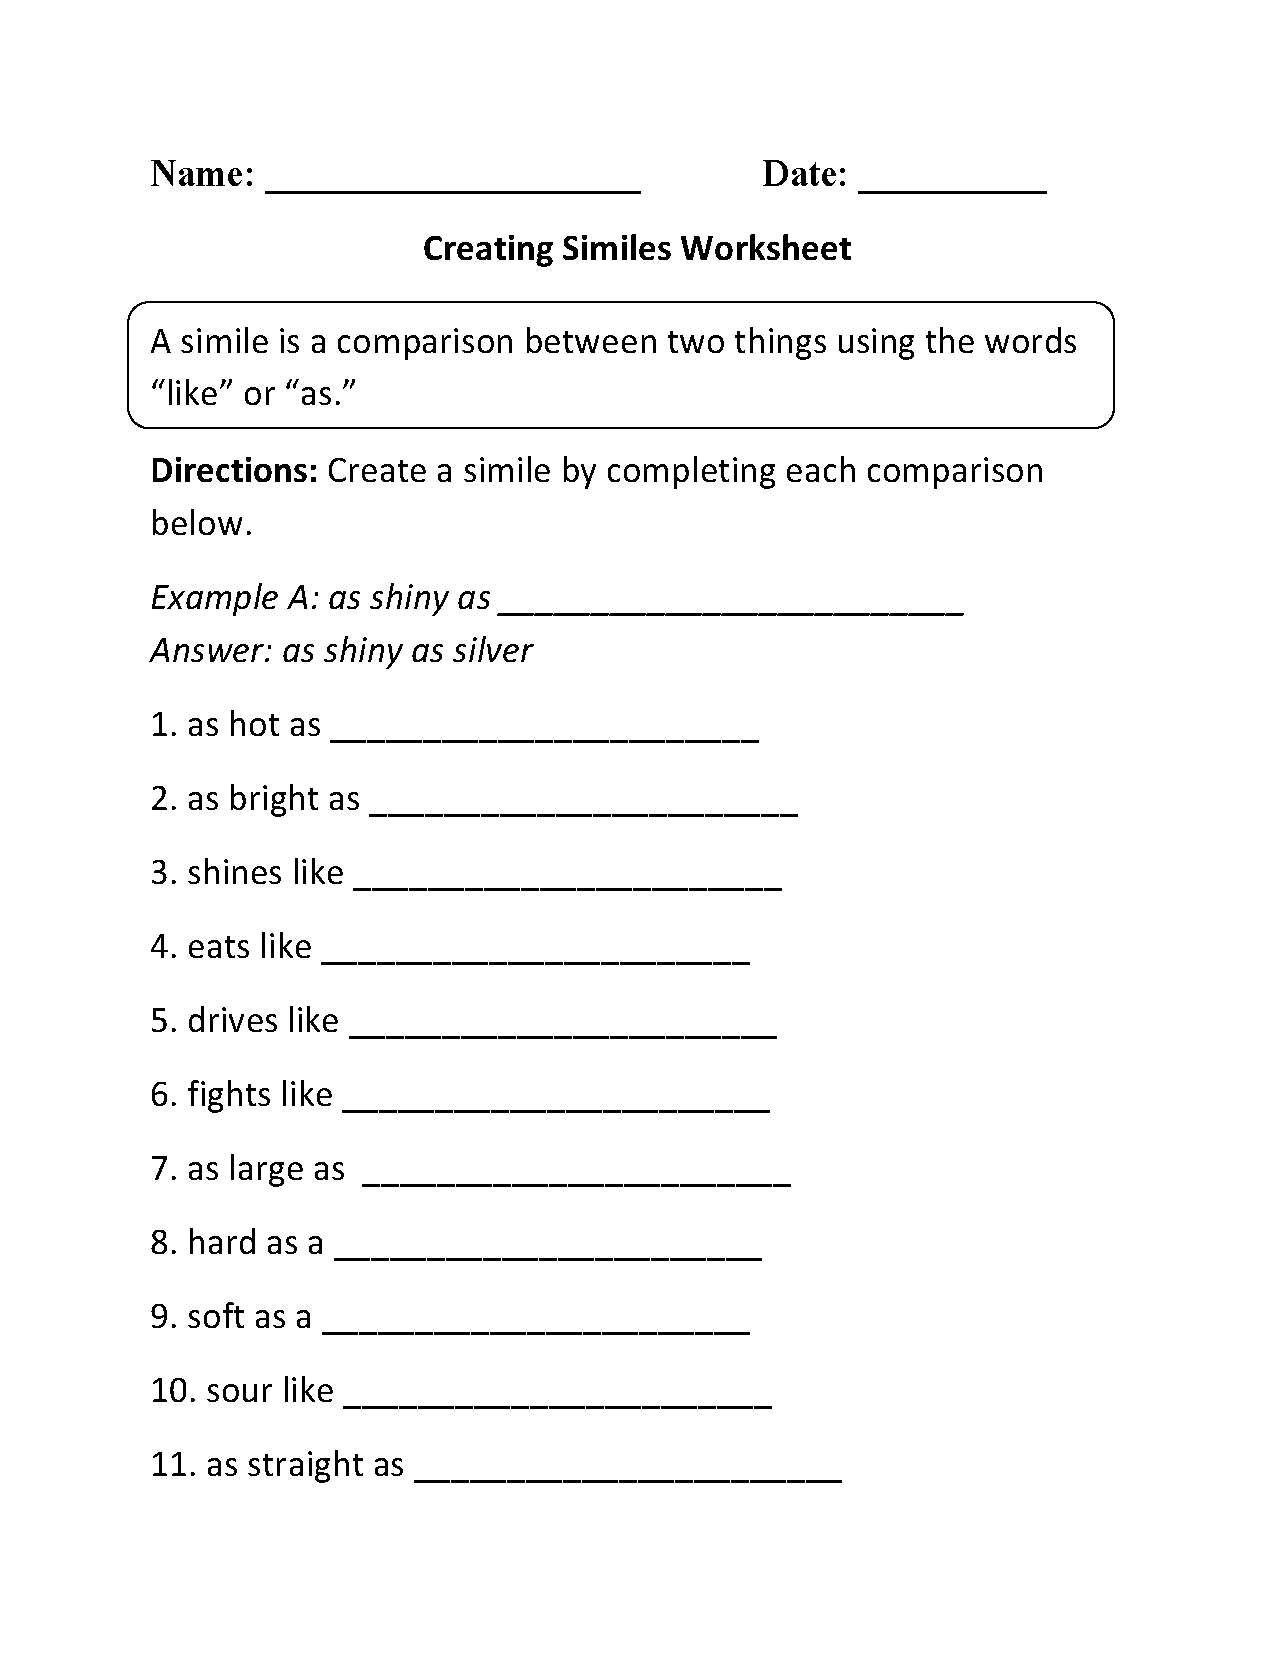 American Civil War Reading Comprehension Worksheet Answers Also 5th Grade Simile and Metaphor Worksheets the Best Worksheets Image